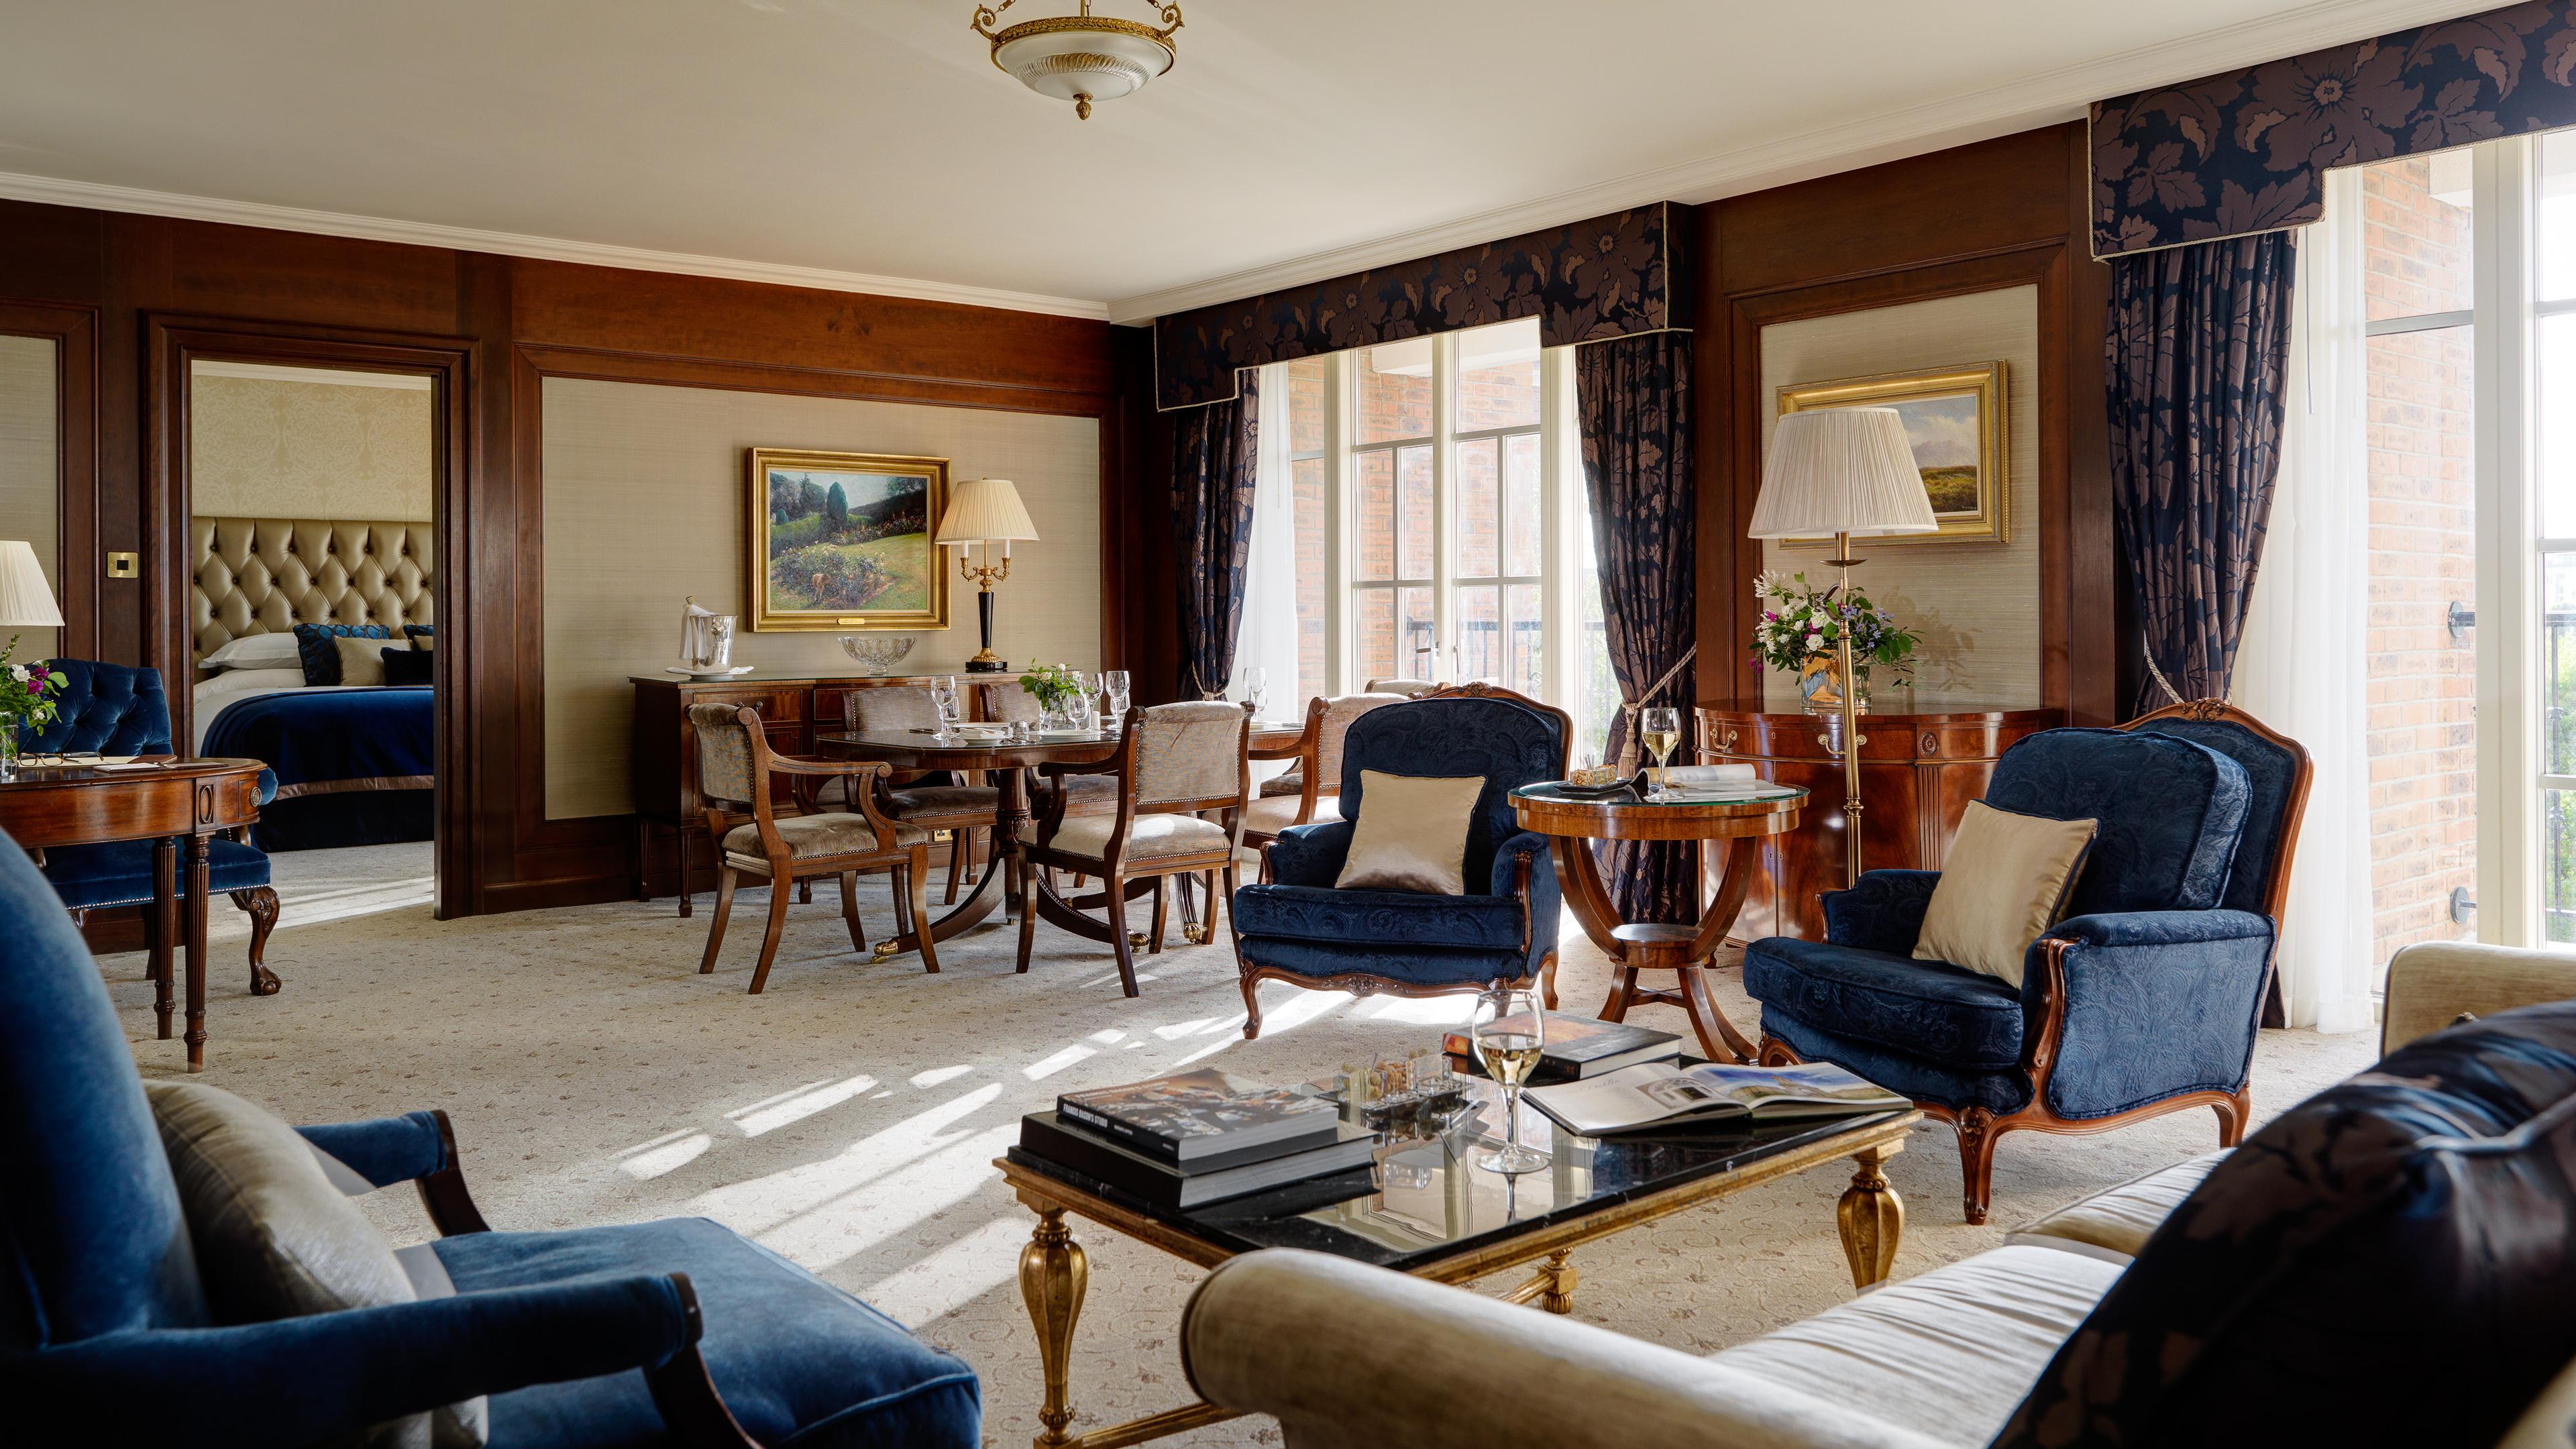 WB Yeats Suite - Residential Style Suite with Large Living Room